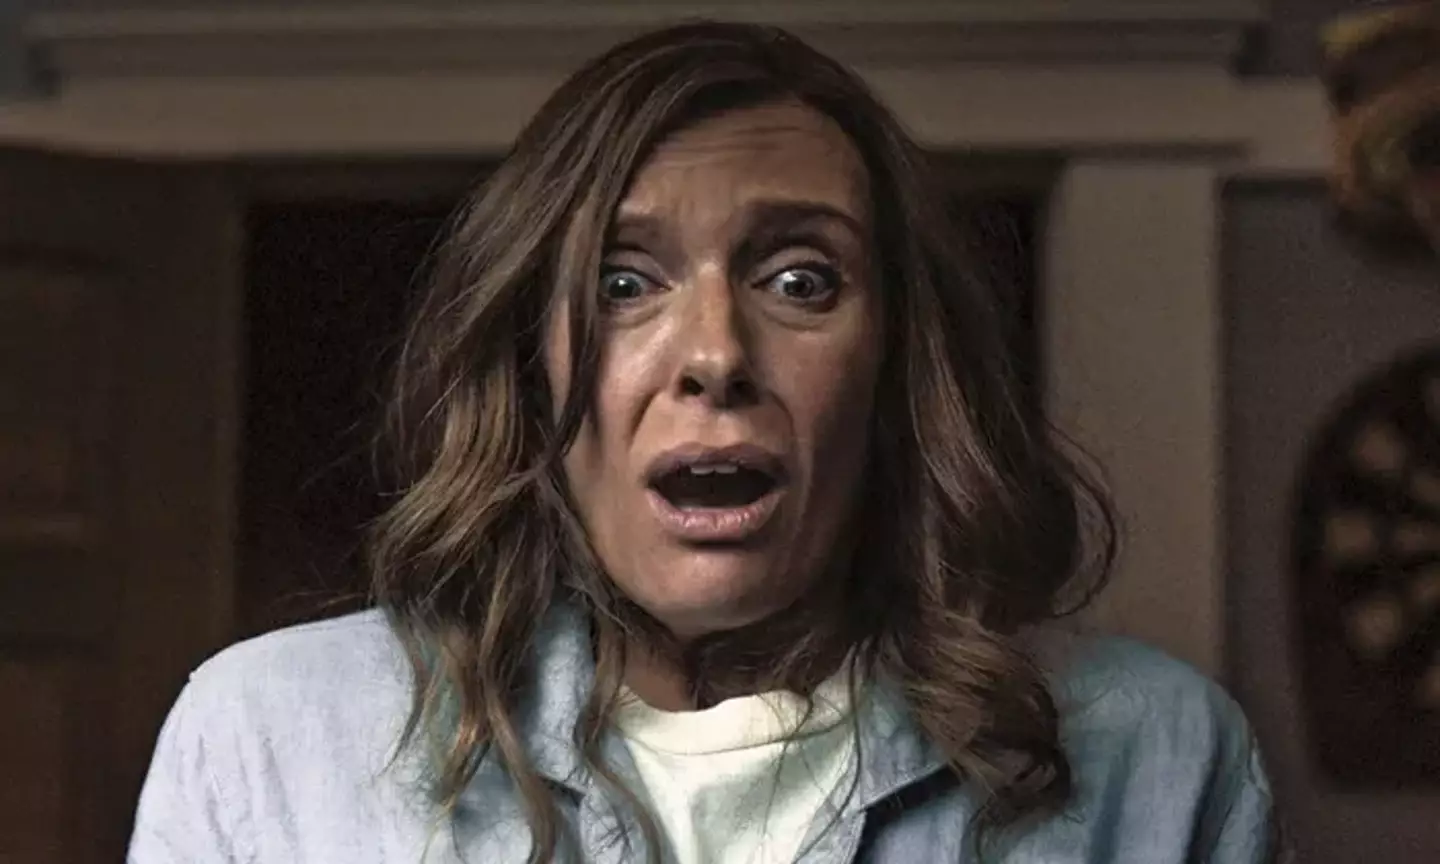 Toni Collette's performance in Hereditary received acclaim.